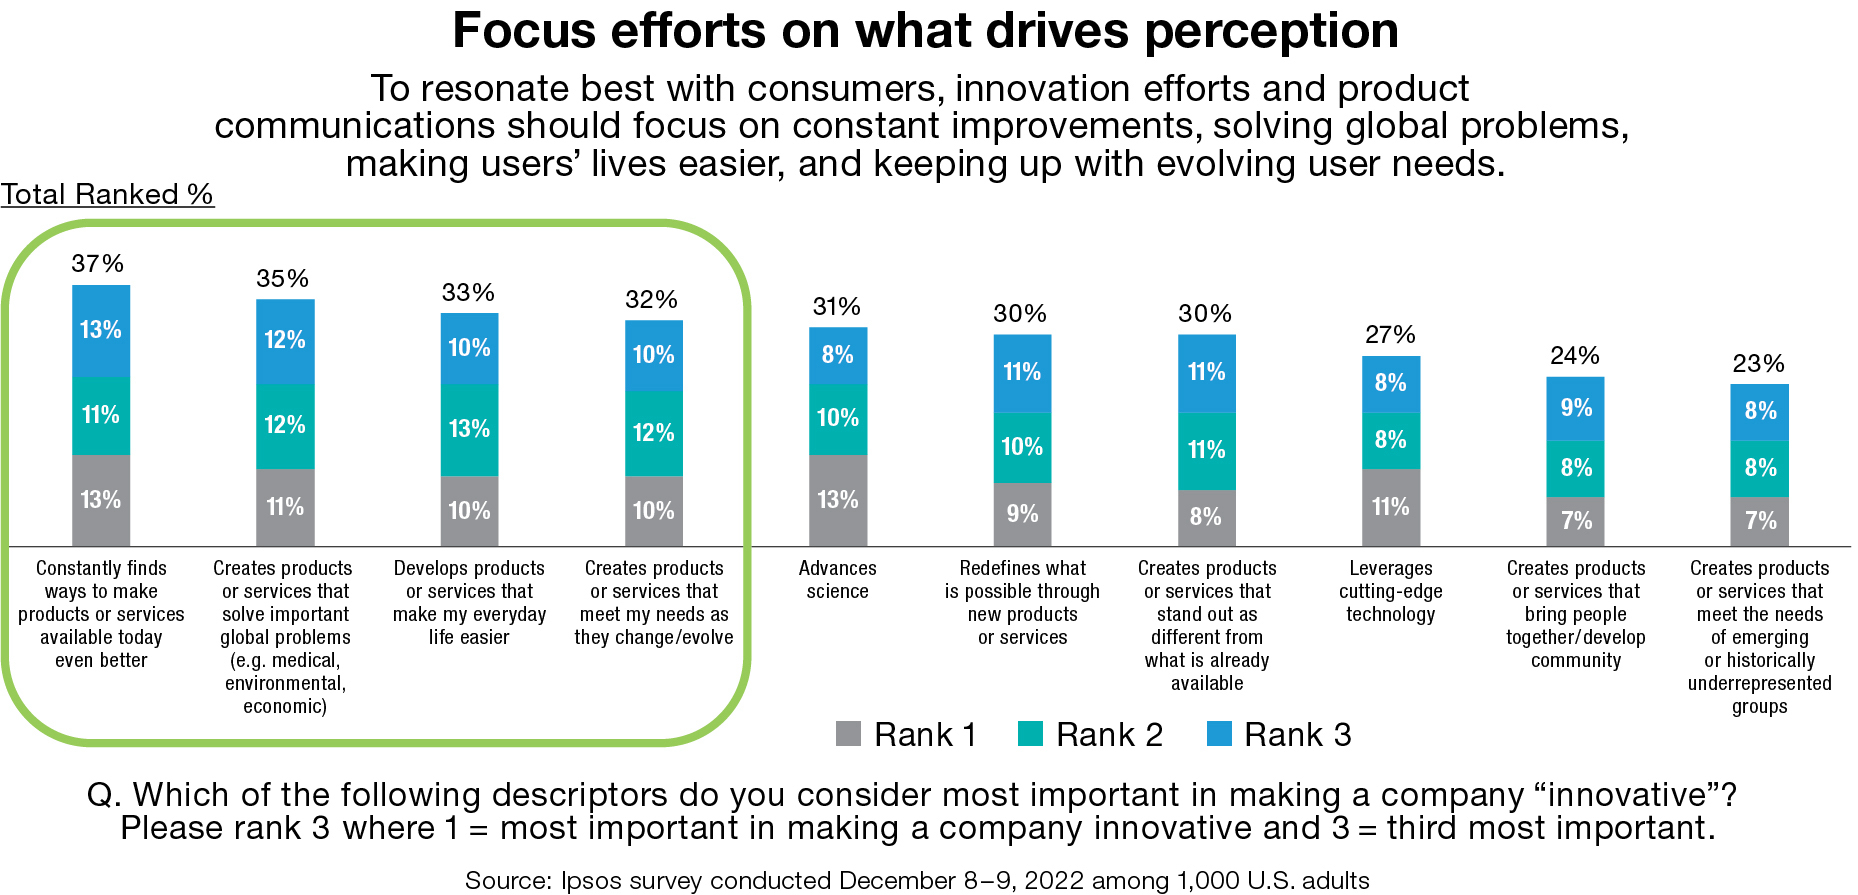 Focus efforts on what drives perception